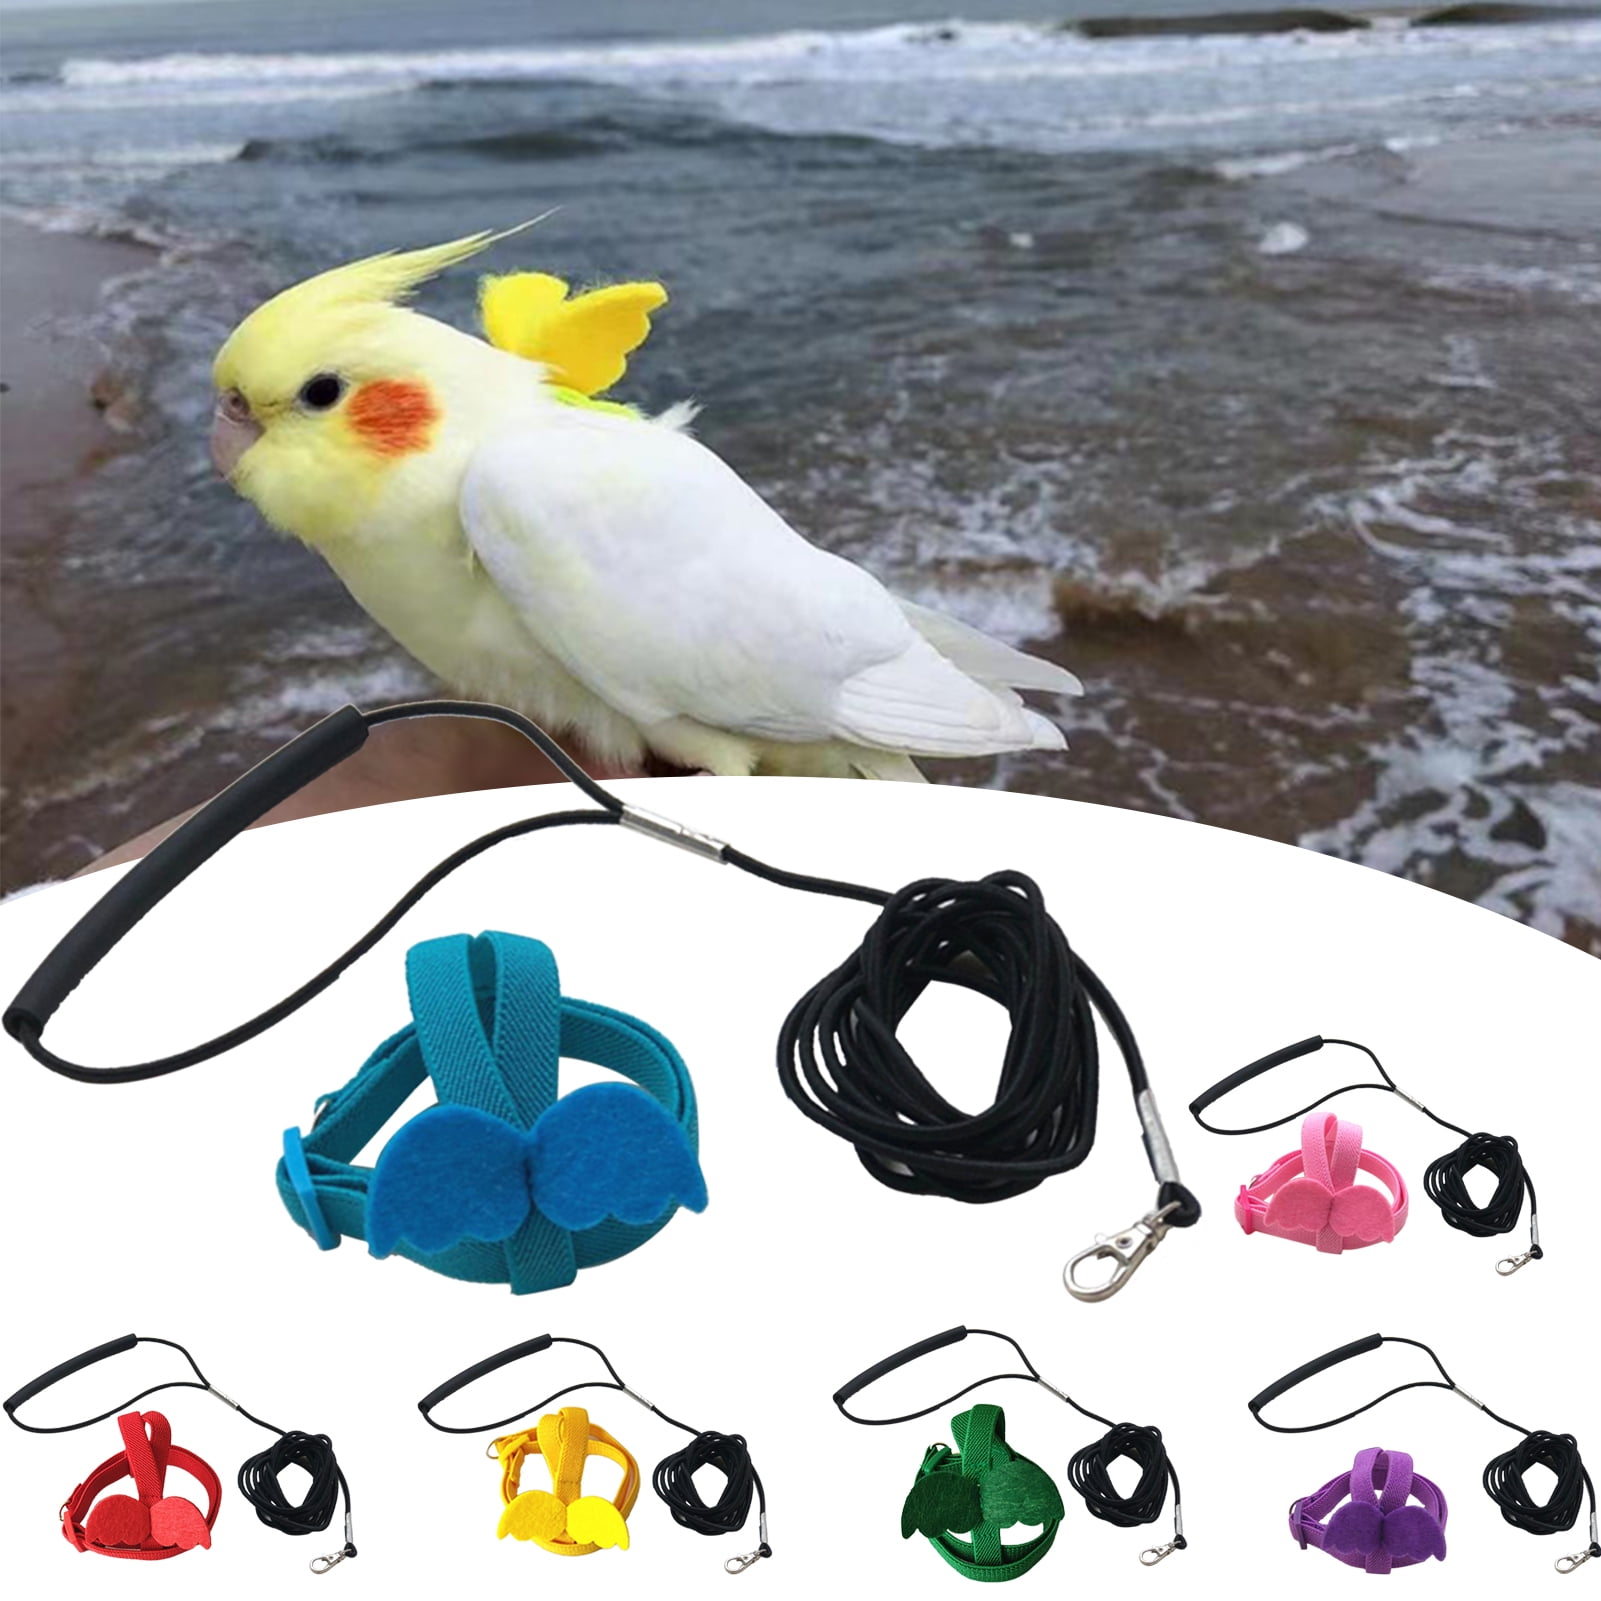 2 Pcs Bird Leash Foot Chain Ring Parrot Cockatiels Peony Cage Accessories